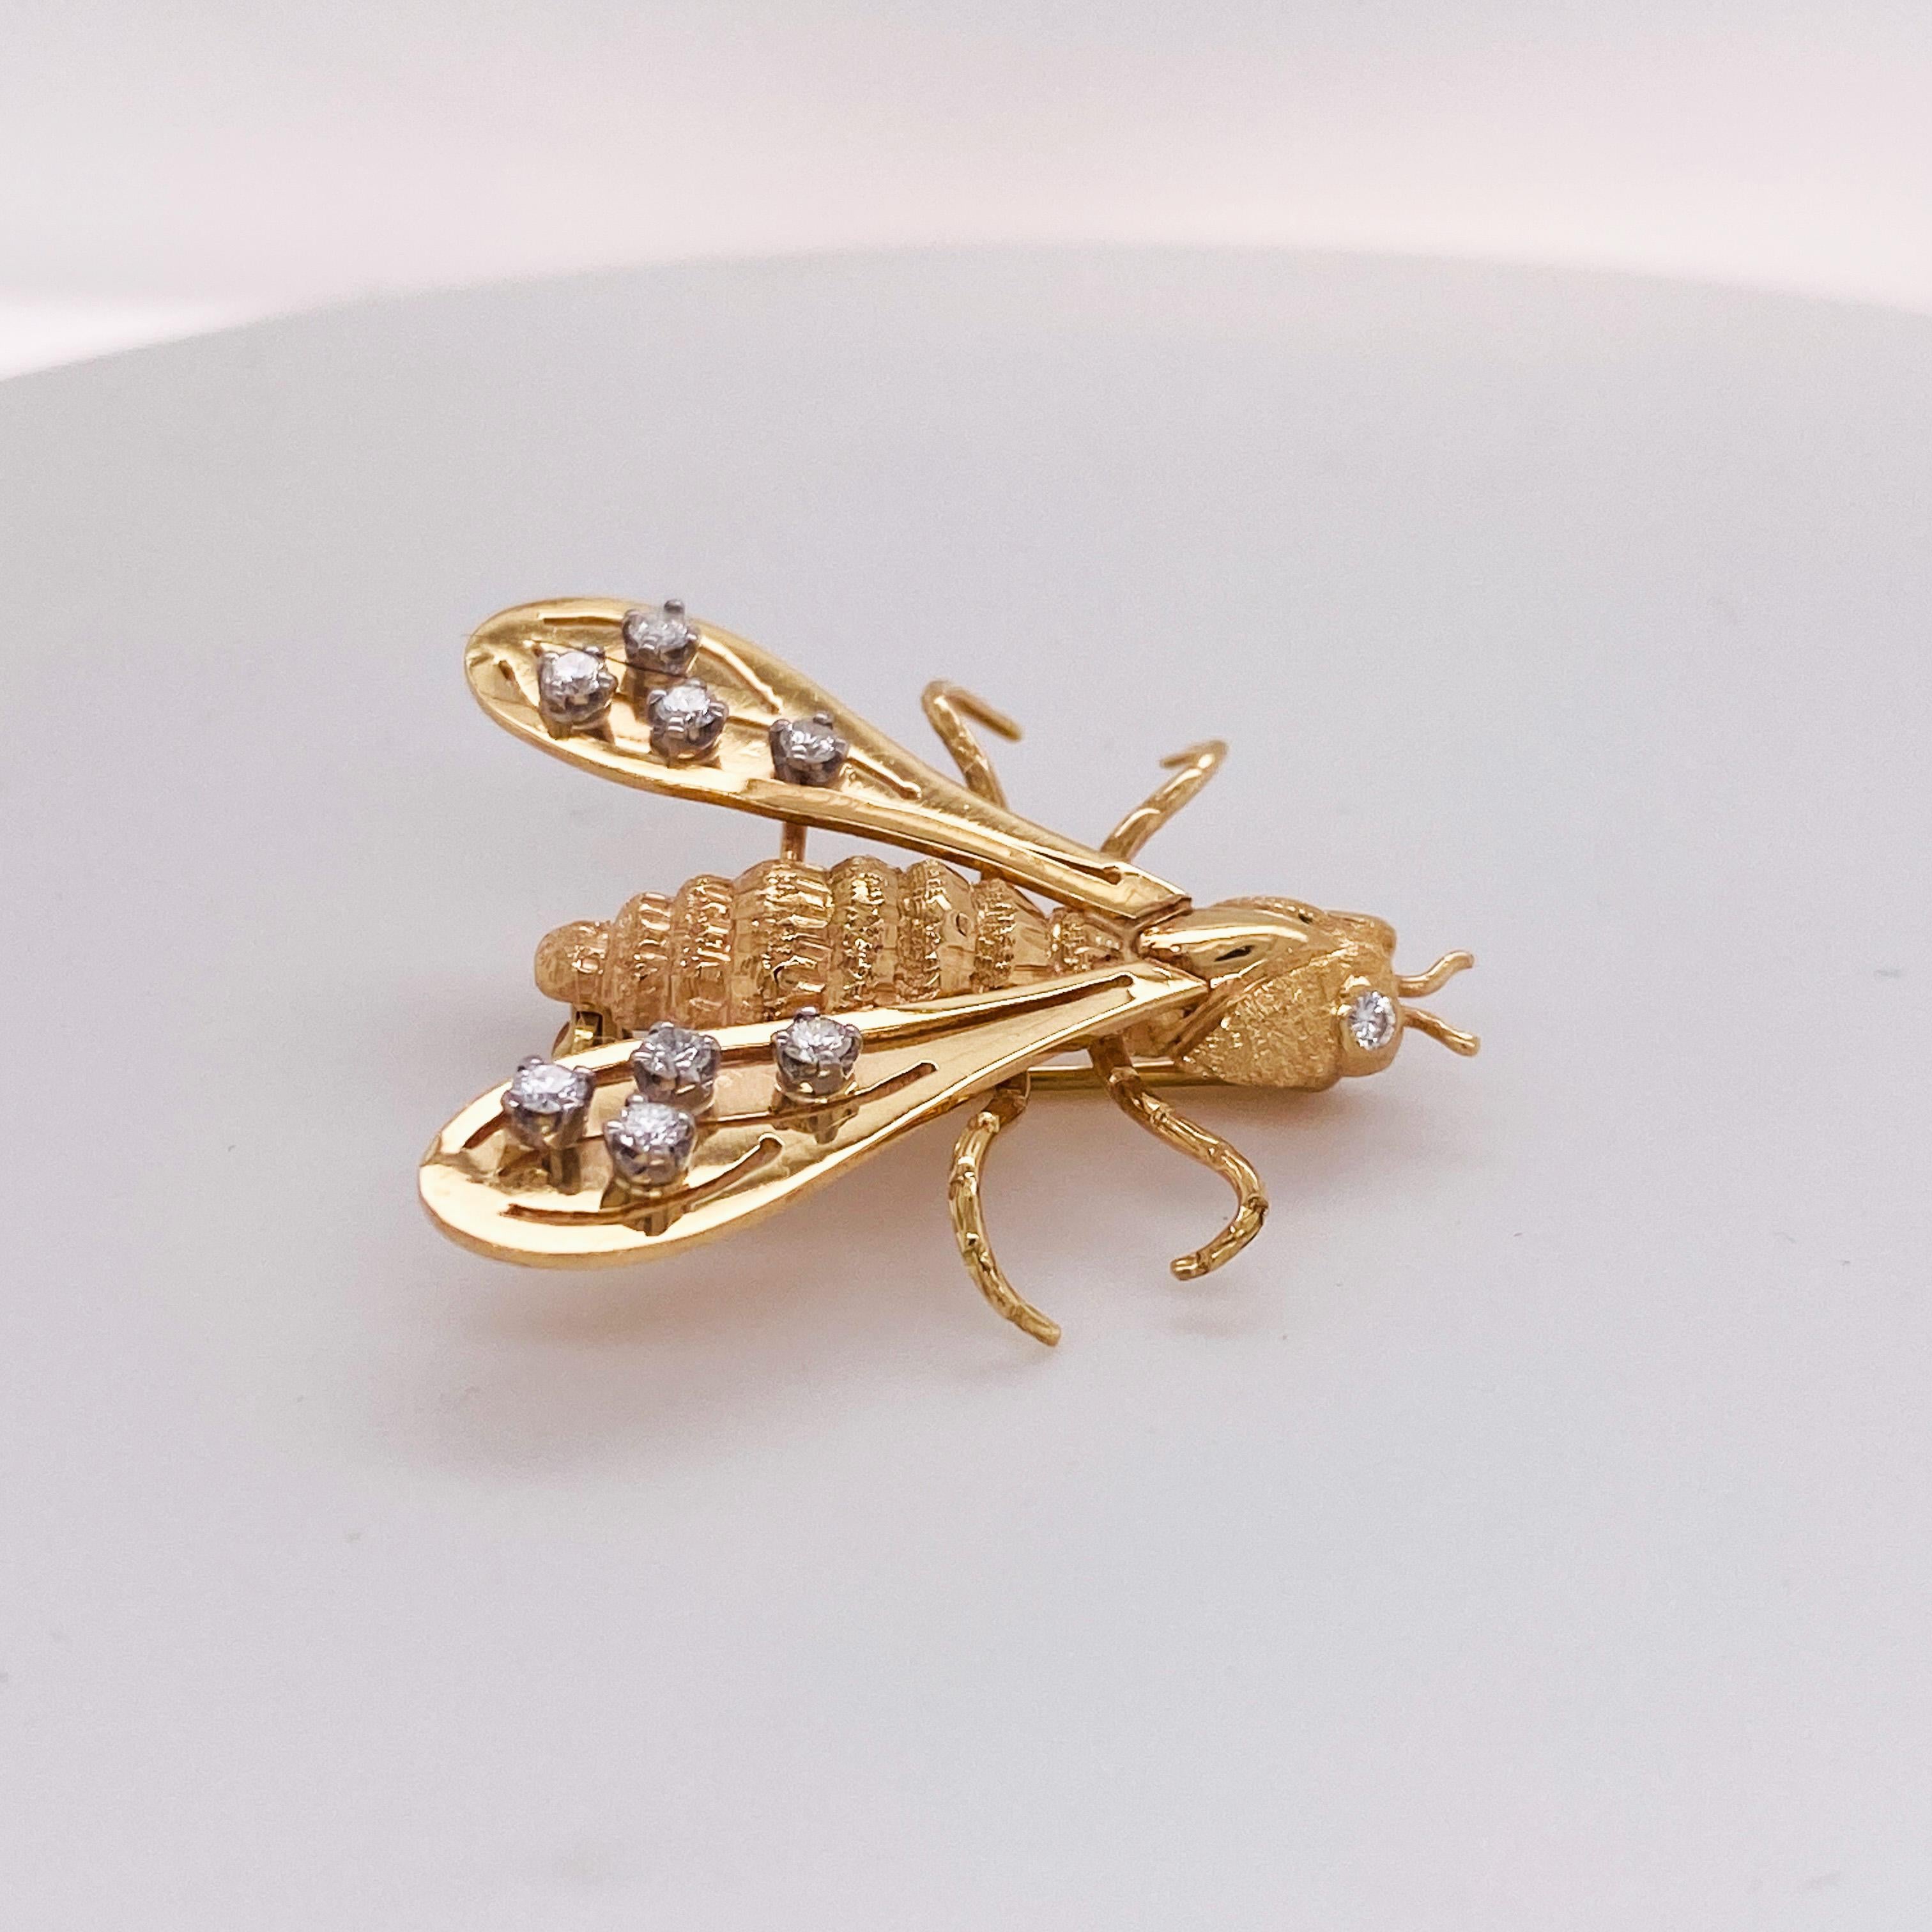 Diamond Fly Wasp Brooch. Come Fly Away w this gorgeous 14 karat yellow gold and diamond brooch. The brooch is solid 14 karat gold and has four diamonds on each wing and a diamond in each eye. The details of this diamond fly is magnificent!  The